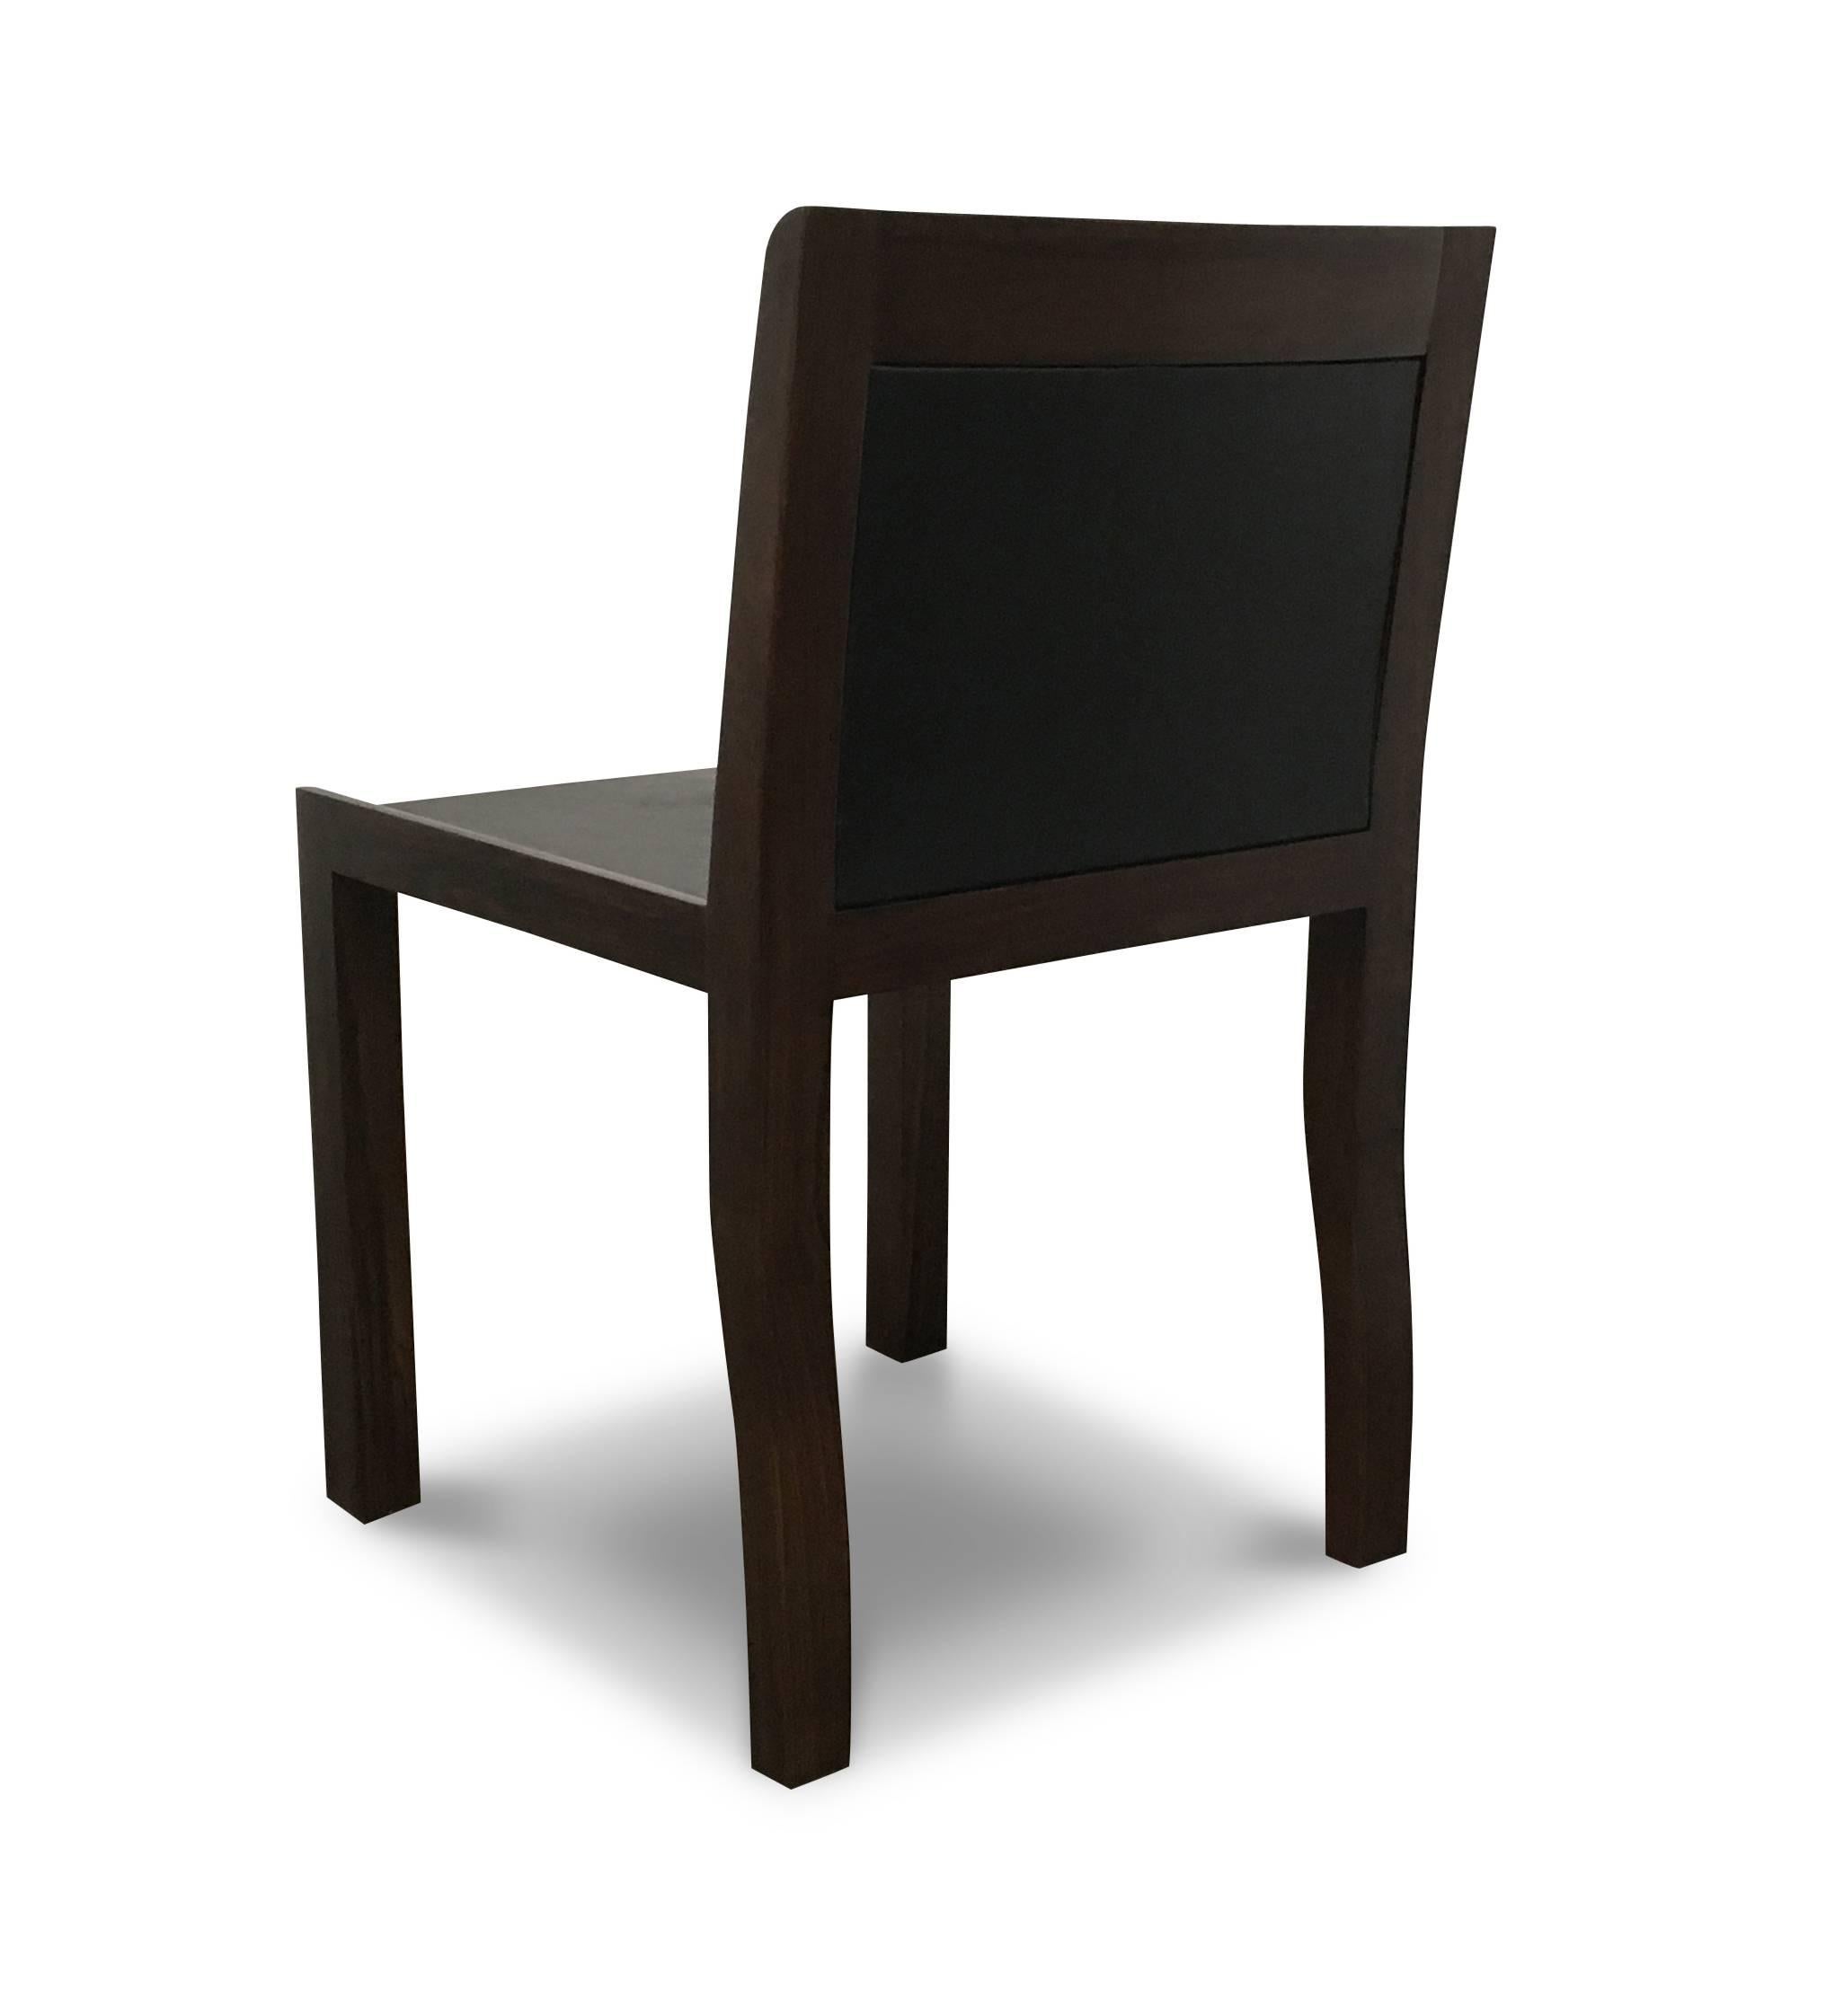 Costantini prides itself in using the hardest and most beautiful hardwoods in the construction of its line of seating. The Orianna chair features a solid Argentine rosewood frame with a wrapped leather seat and back. Available in several different